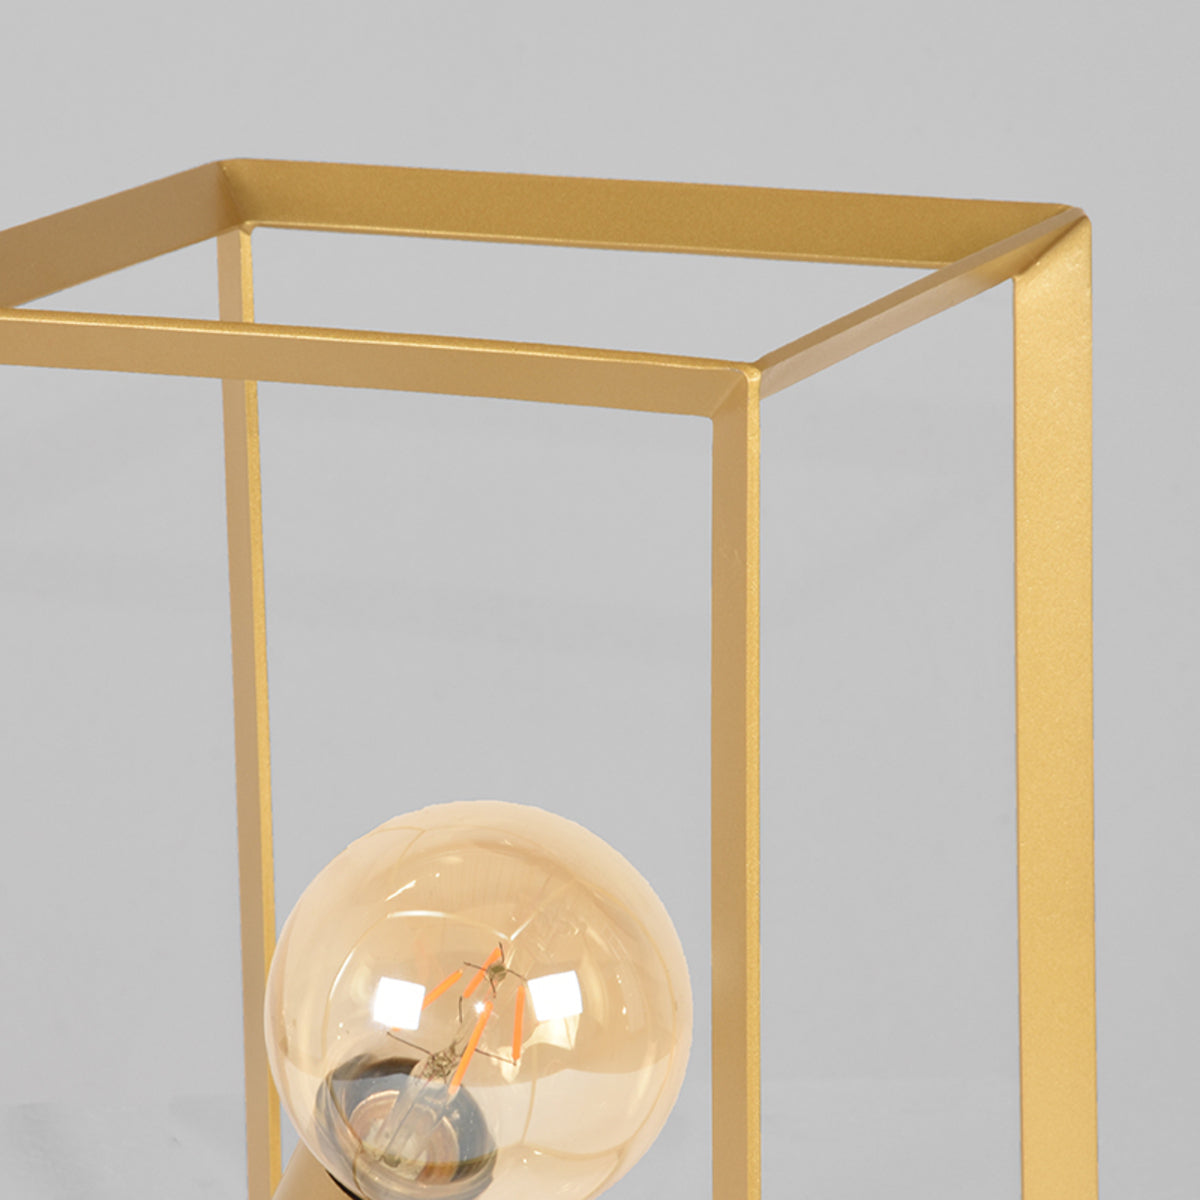 LABEL51 Table lamp Tetto - Antique gold - Metal